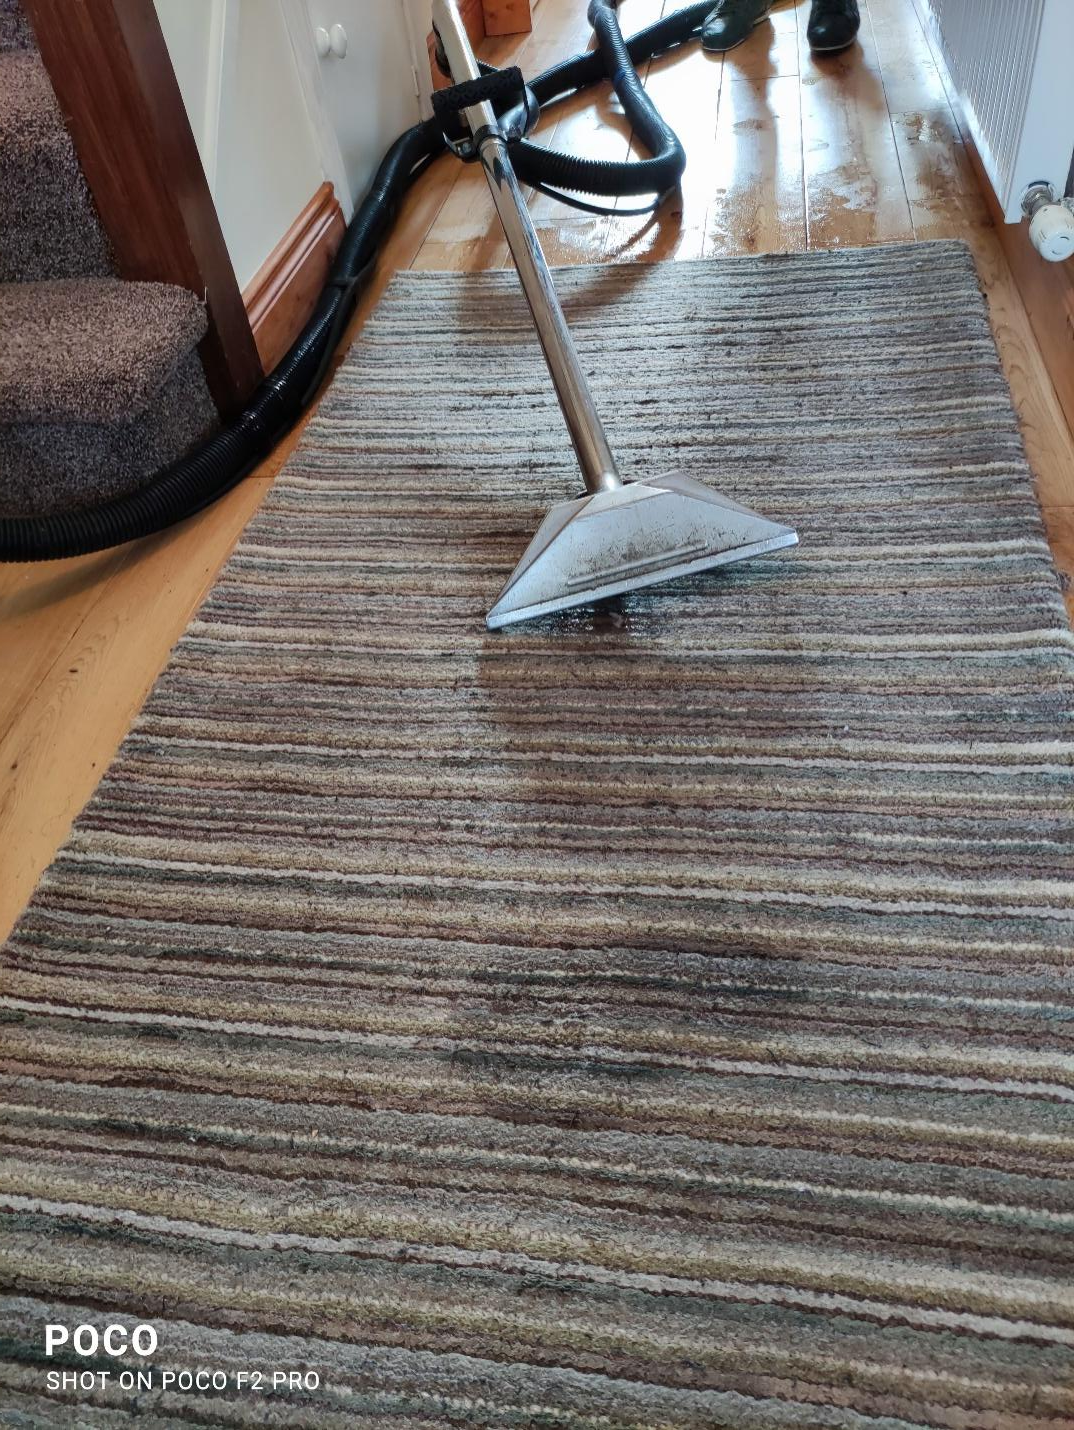 Domestic Carpet Cleaning Services